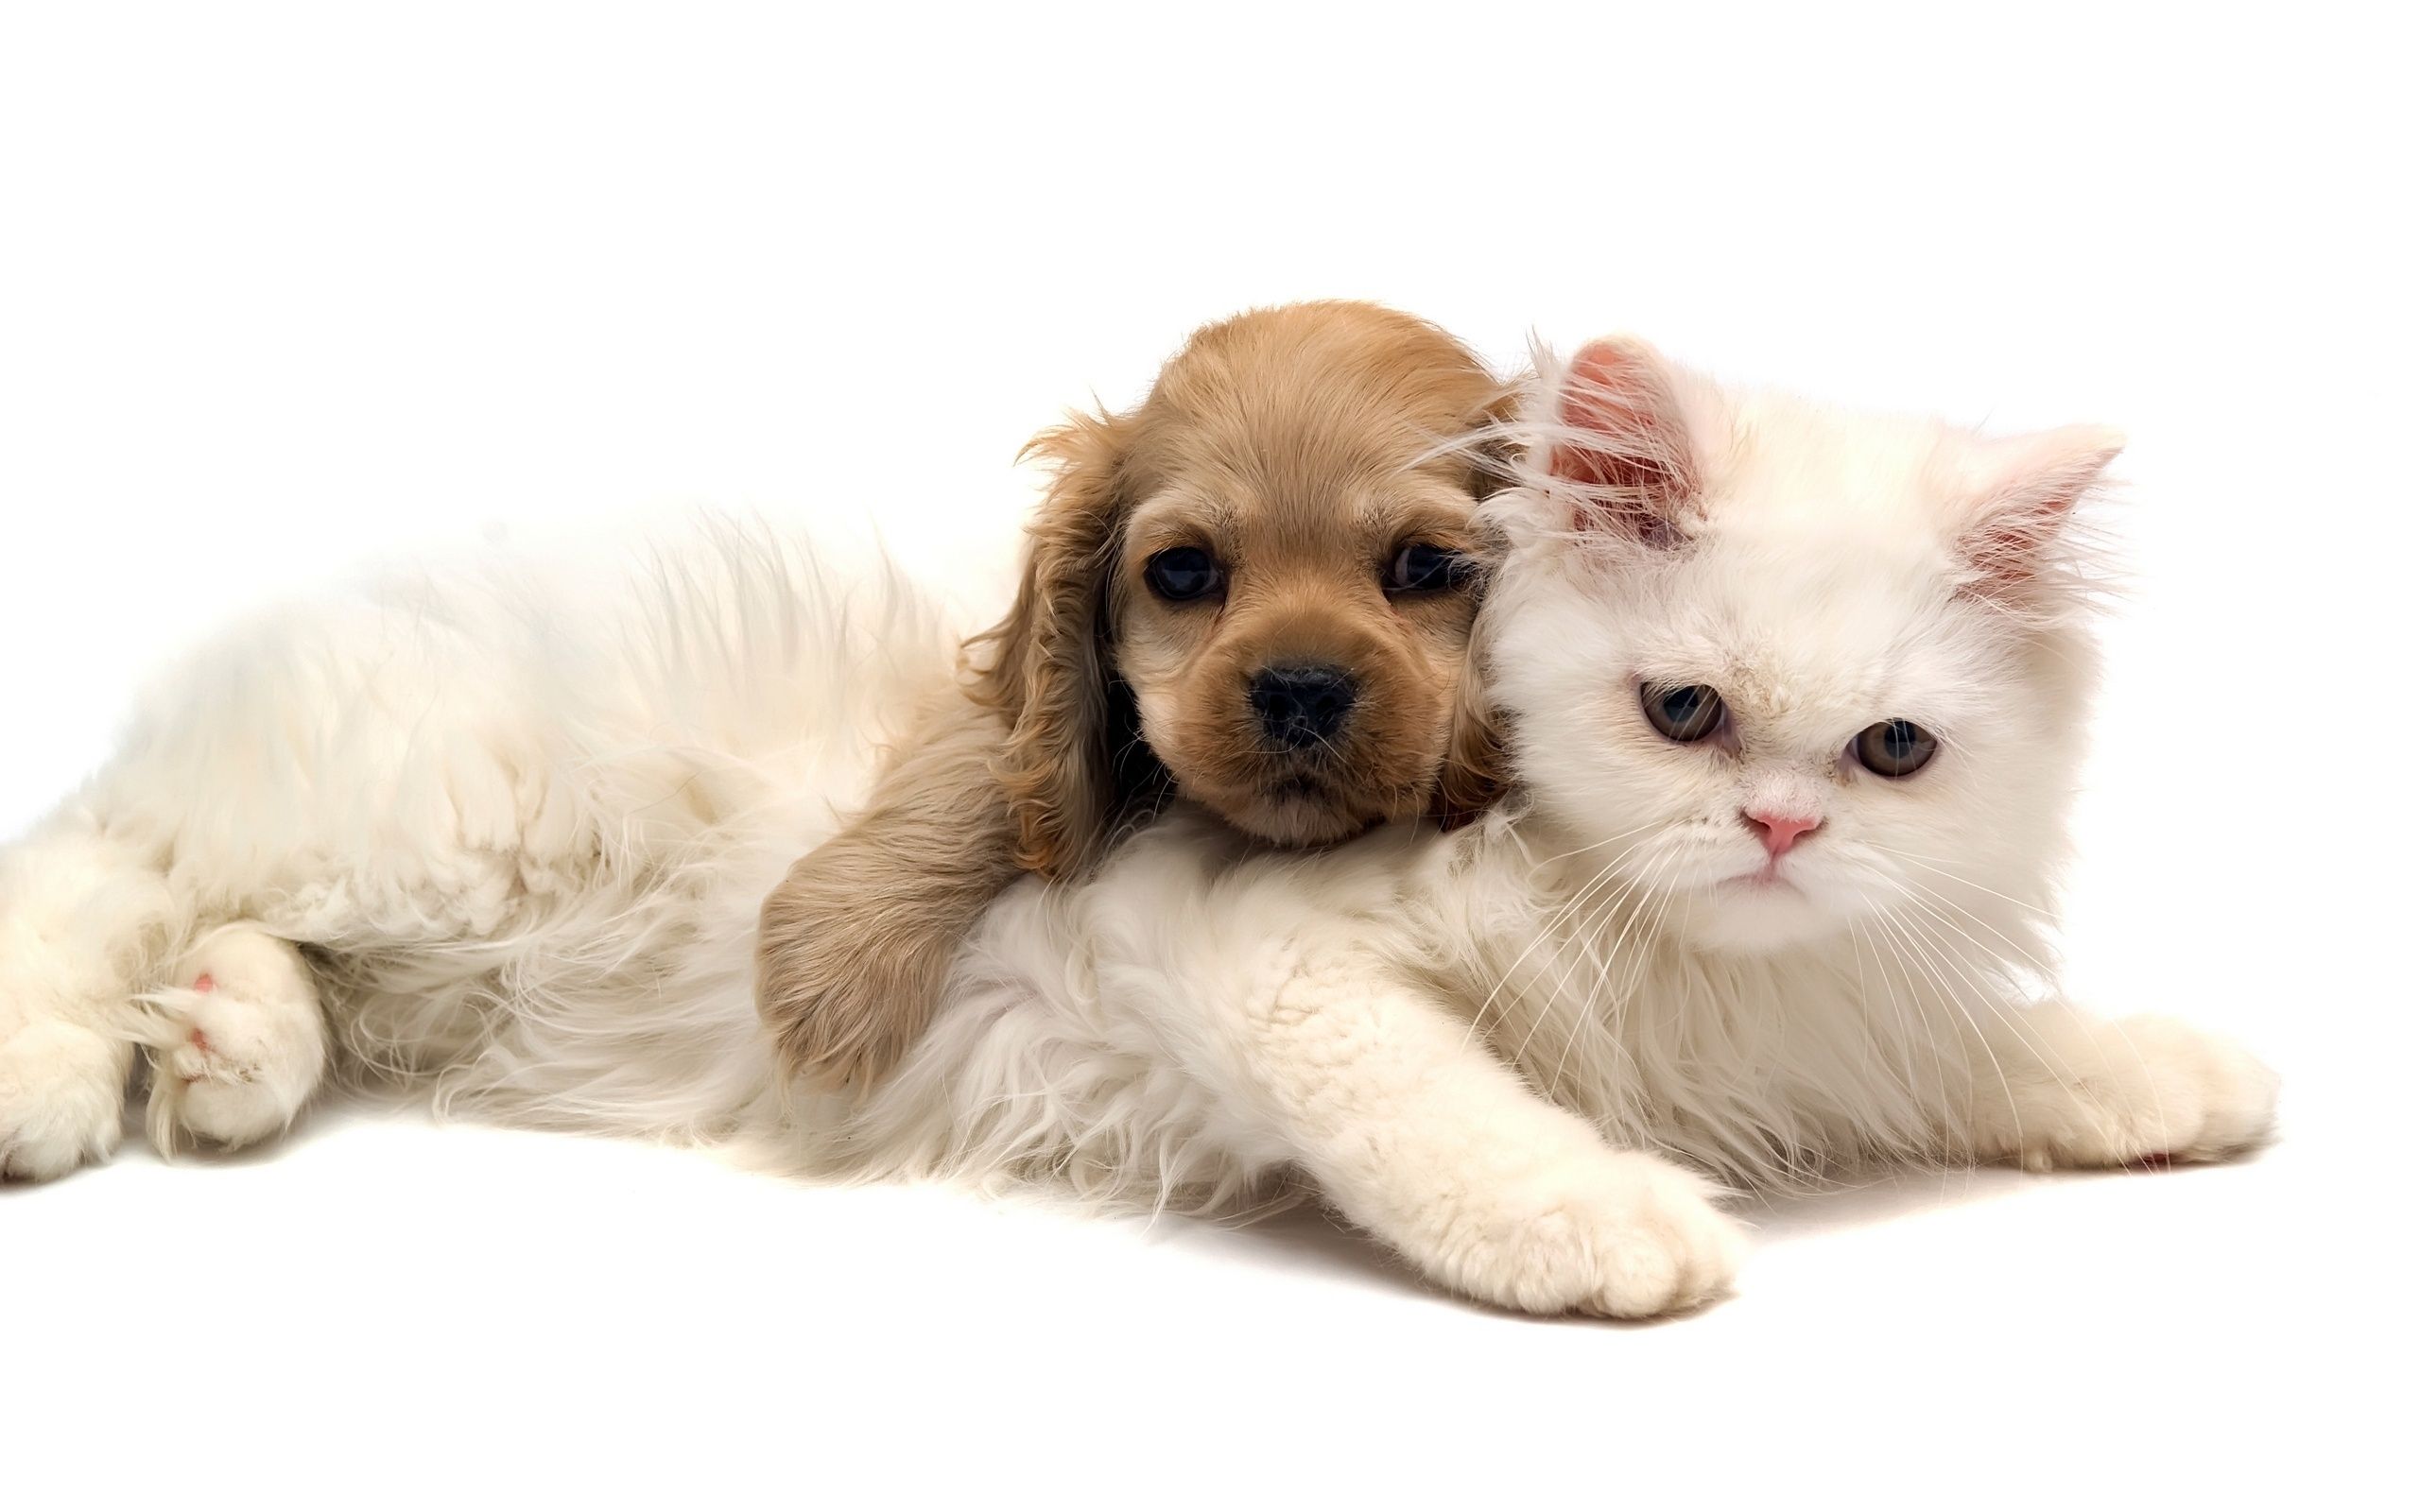 Cute Dog and Cat Wallpaper. Wallpaper, Background, Image, Art Photo. Cute cats and dogs, Kittens and puppies, Cute puppies